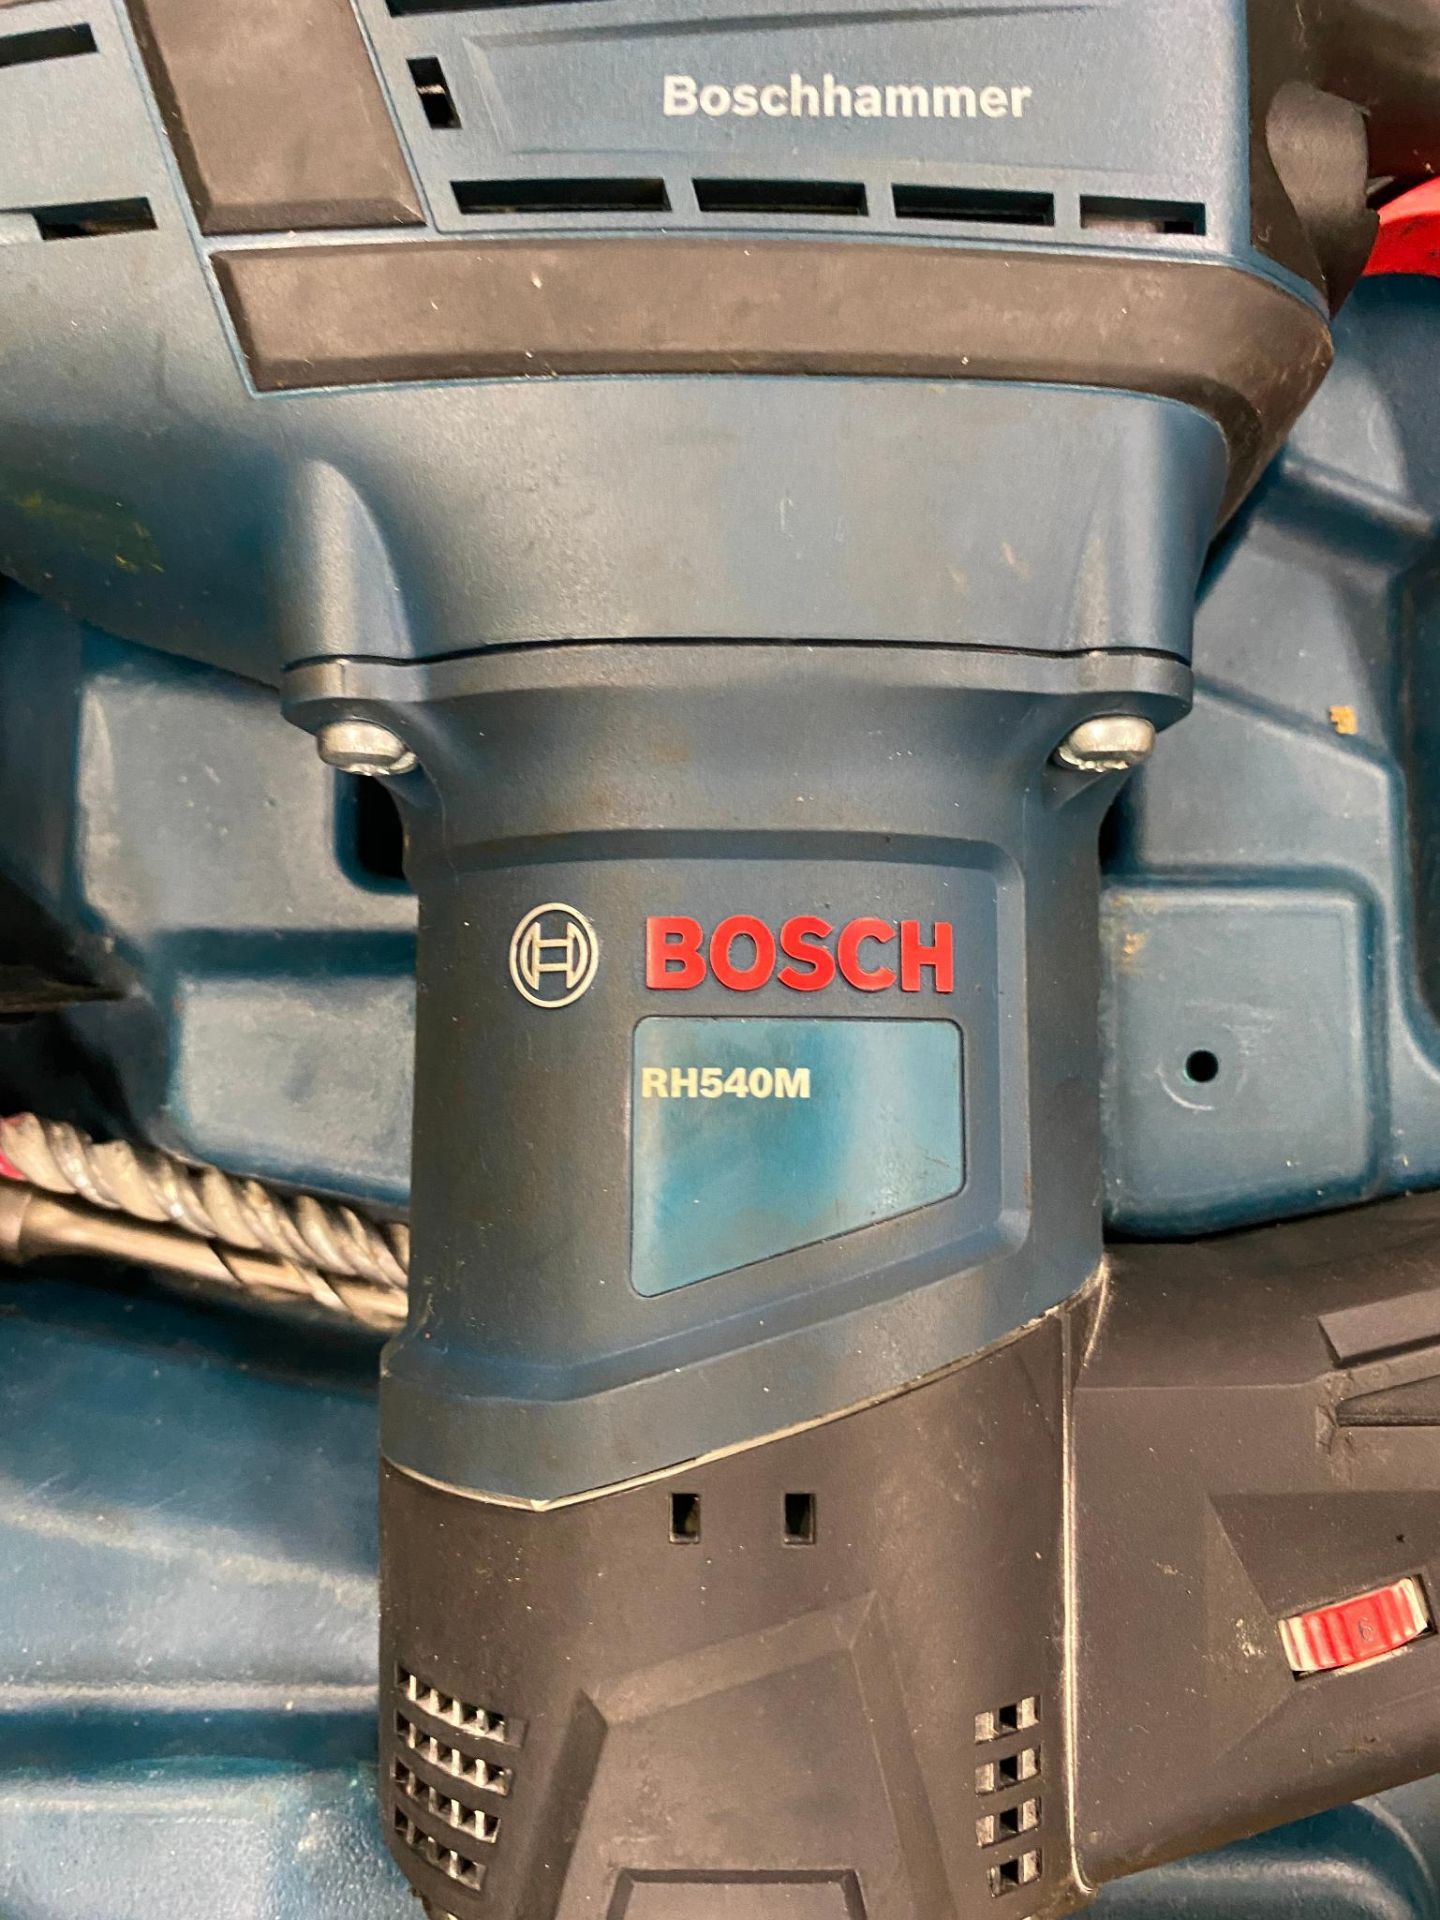 ROTARY HAMMER, BOSCH MDL. RH540M, 1-9/16" SDS max. combination, w/ drills & case - Image 2 of 2